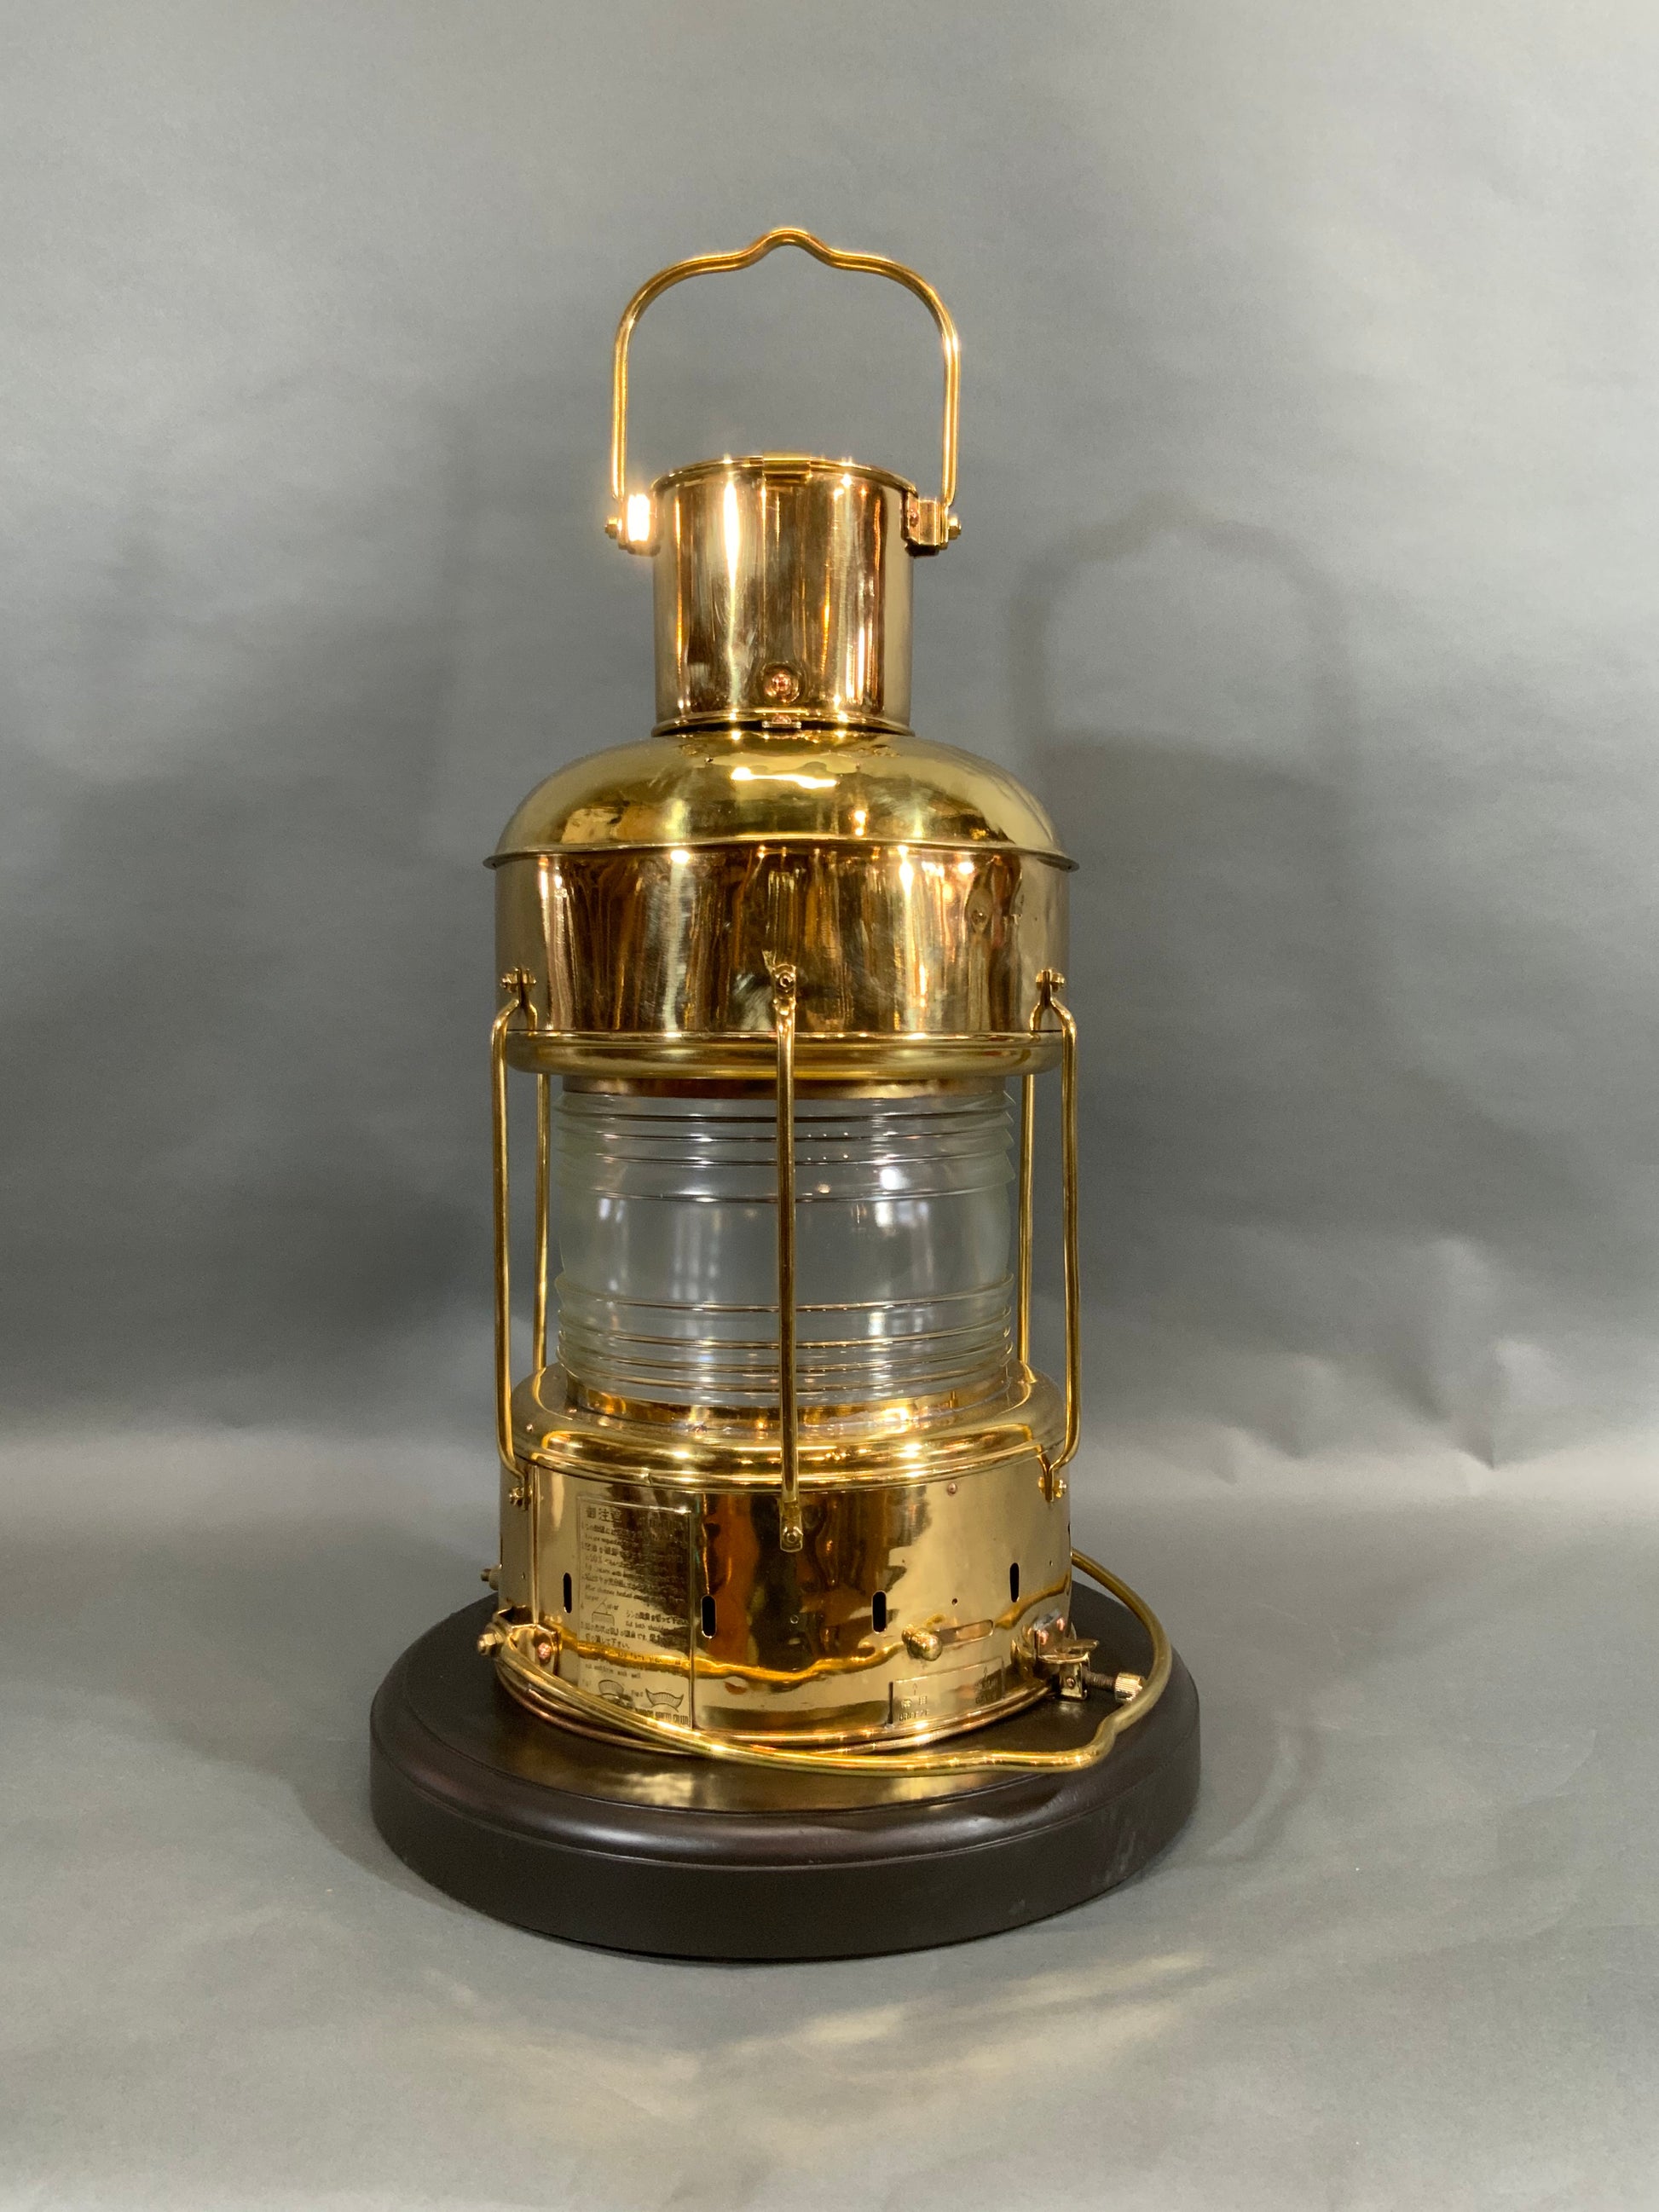 Solid Brass Ship's Anchor Lantern with Fresnel Lens by Nippon